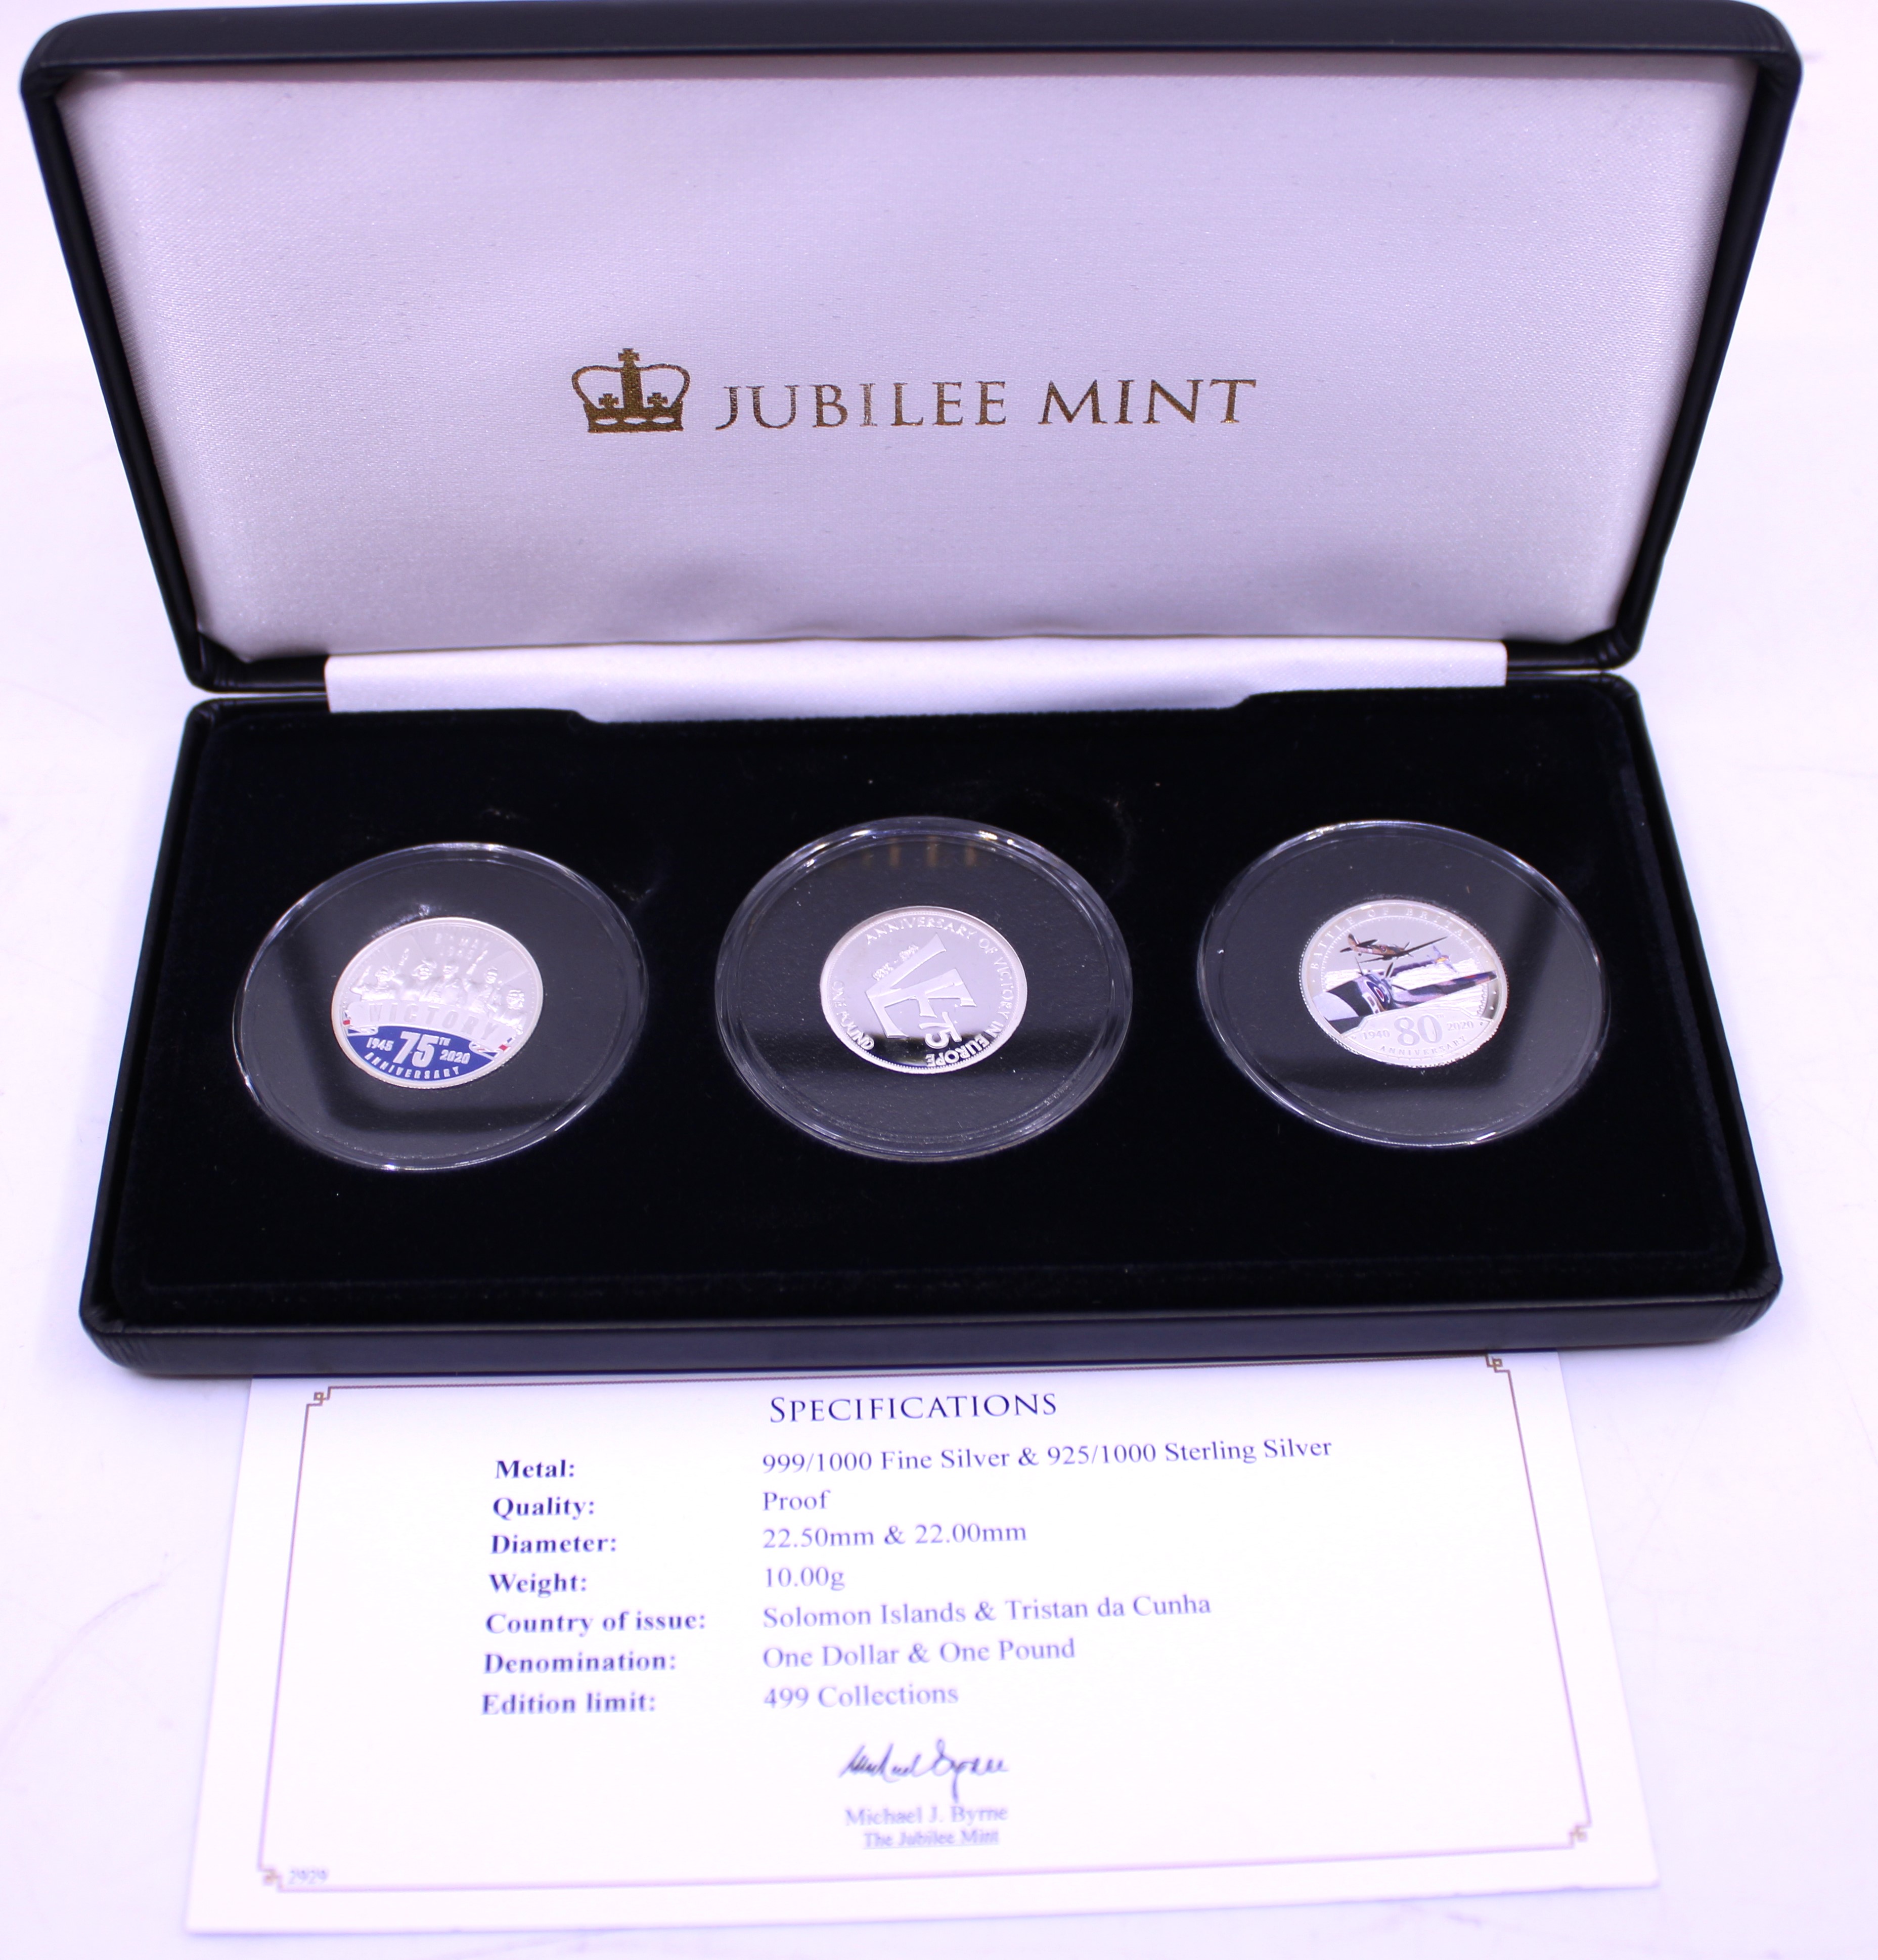 Jubilee Mint The World War II Silver Proof Coin Collection. Metal: 999/1000 Fine Silver & 925/1000